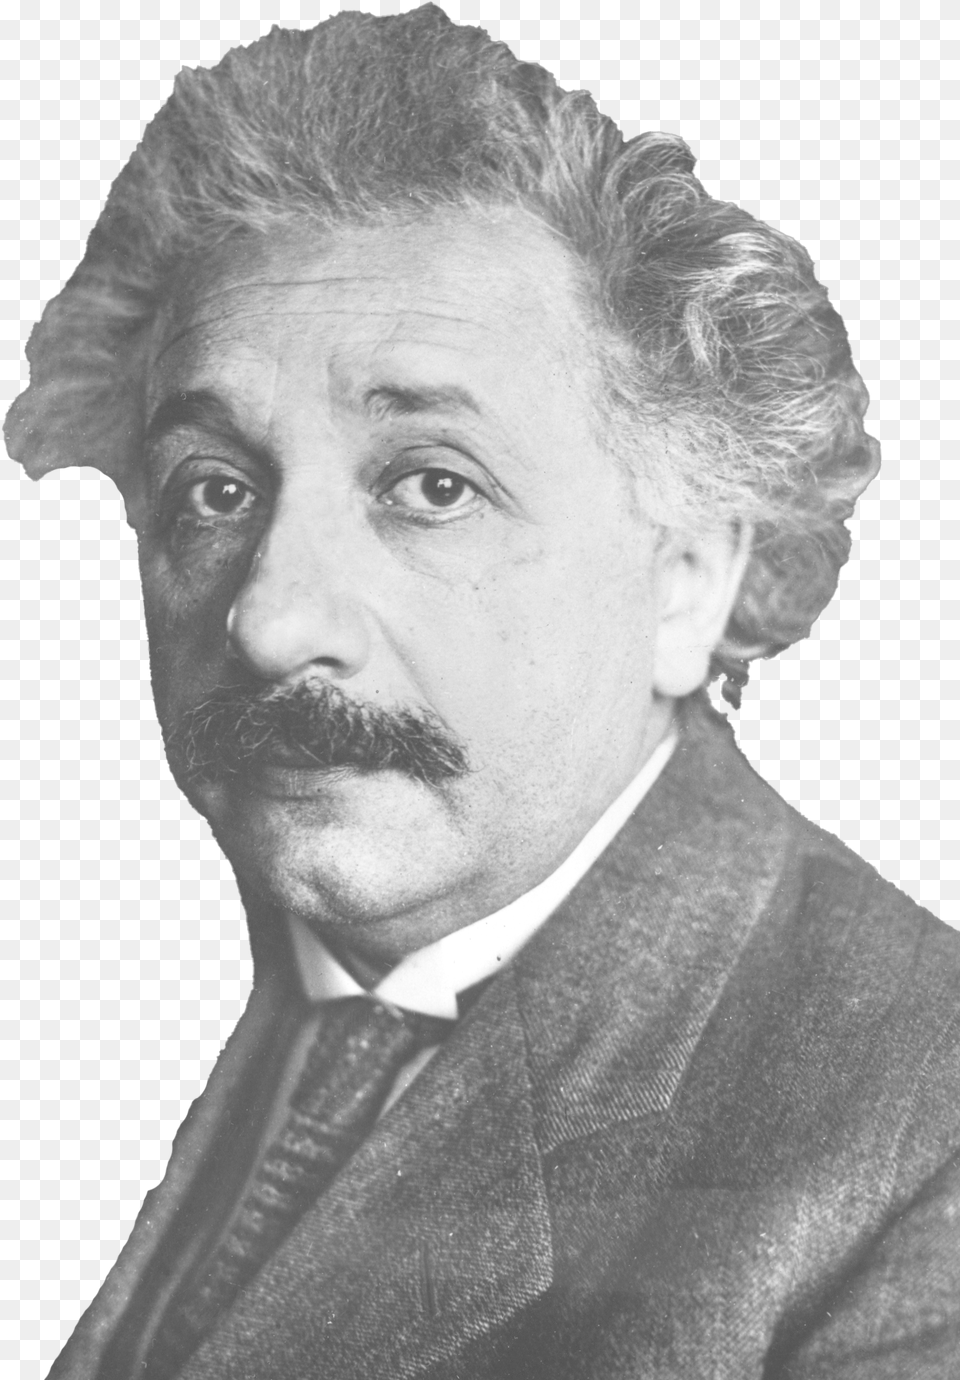 Scientist Albert Einstein Image File All Famous People That Have Died, Adult, Portrait, Photography, Person Png